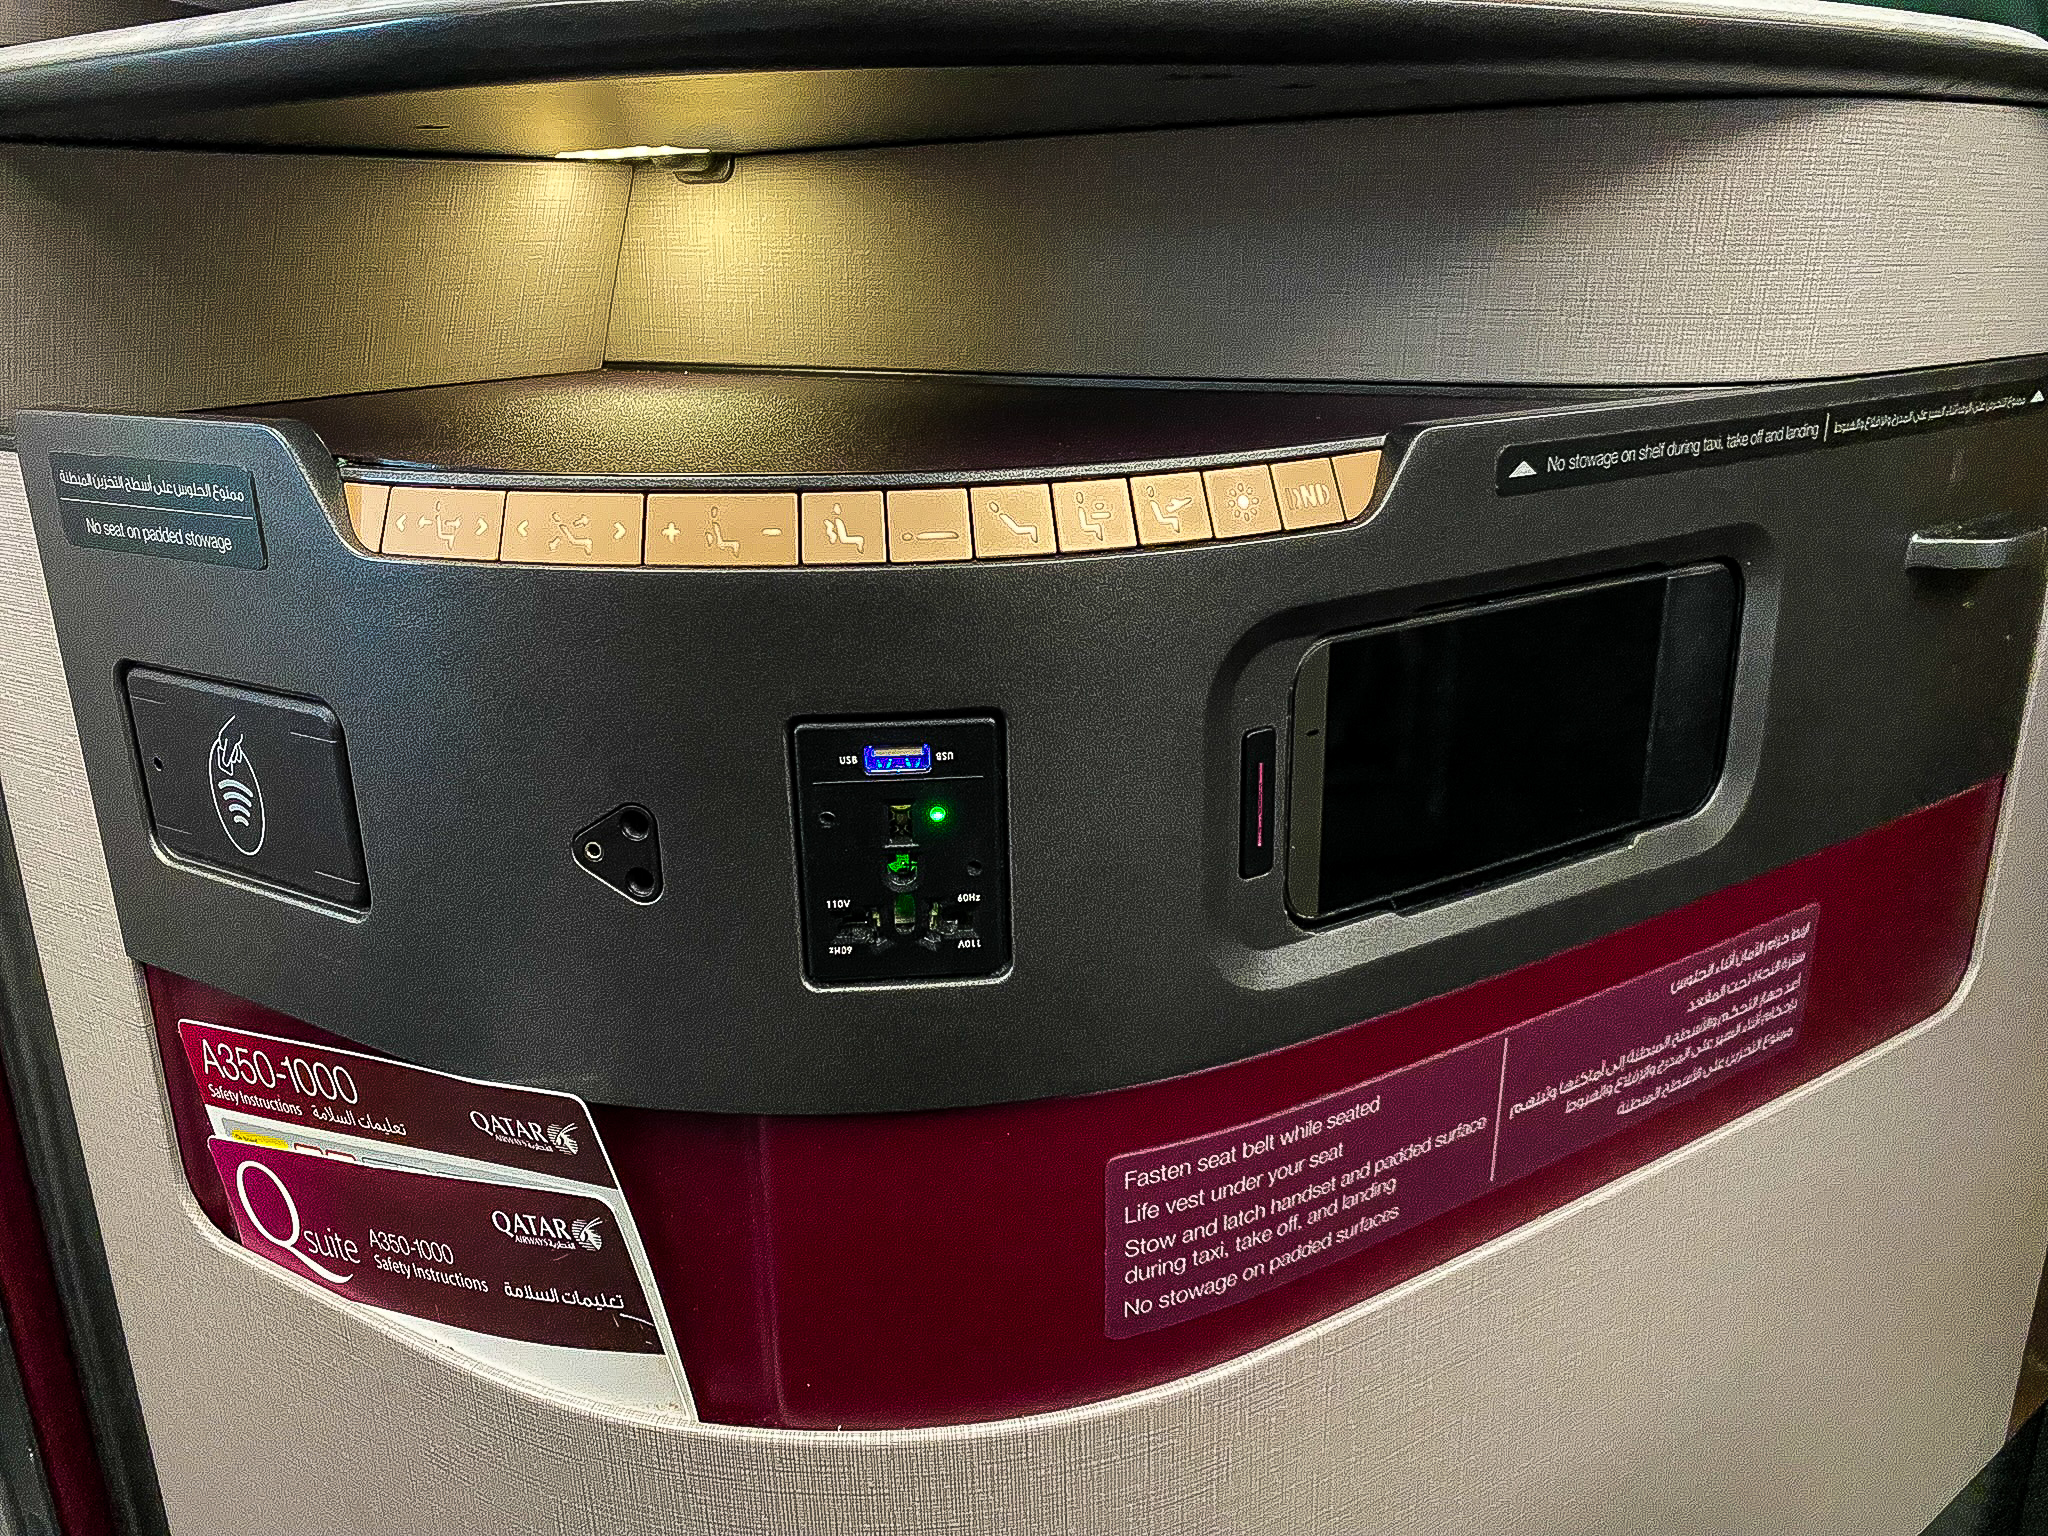 Qatar Airways Qsuites seat controls and outlets